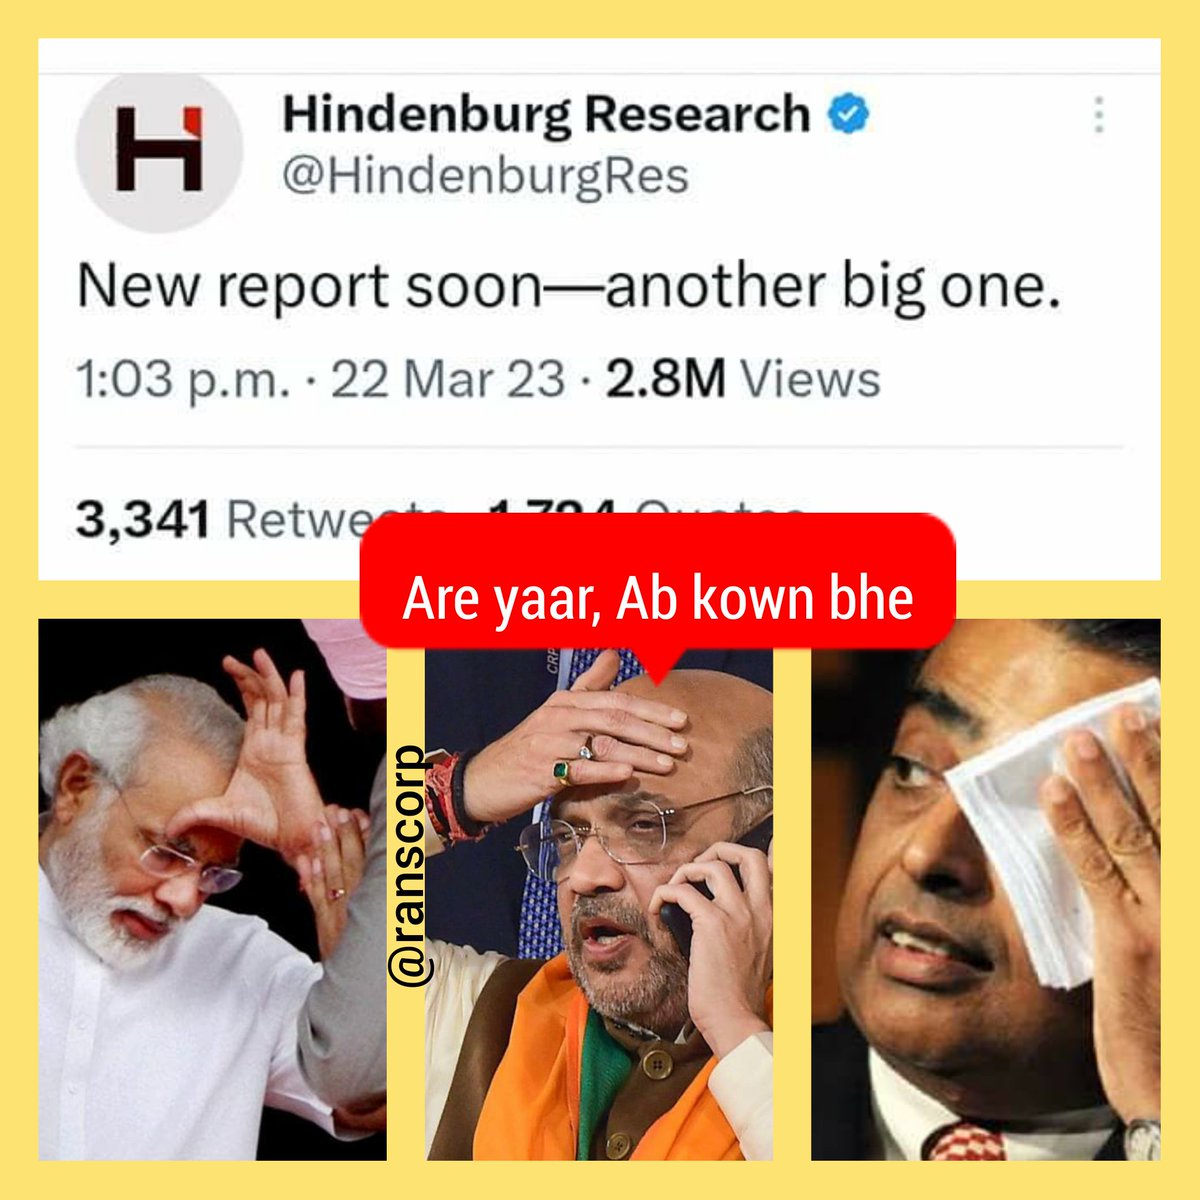 Hindenburg Research announces upcoming report release.🤣🤣🤣🤗🤗🤗🤗
#Hindenburg #HindenburgReport #AdaniScam @HindenburgRes @HindenburgNews @gautam_adani @AdaniOnline